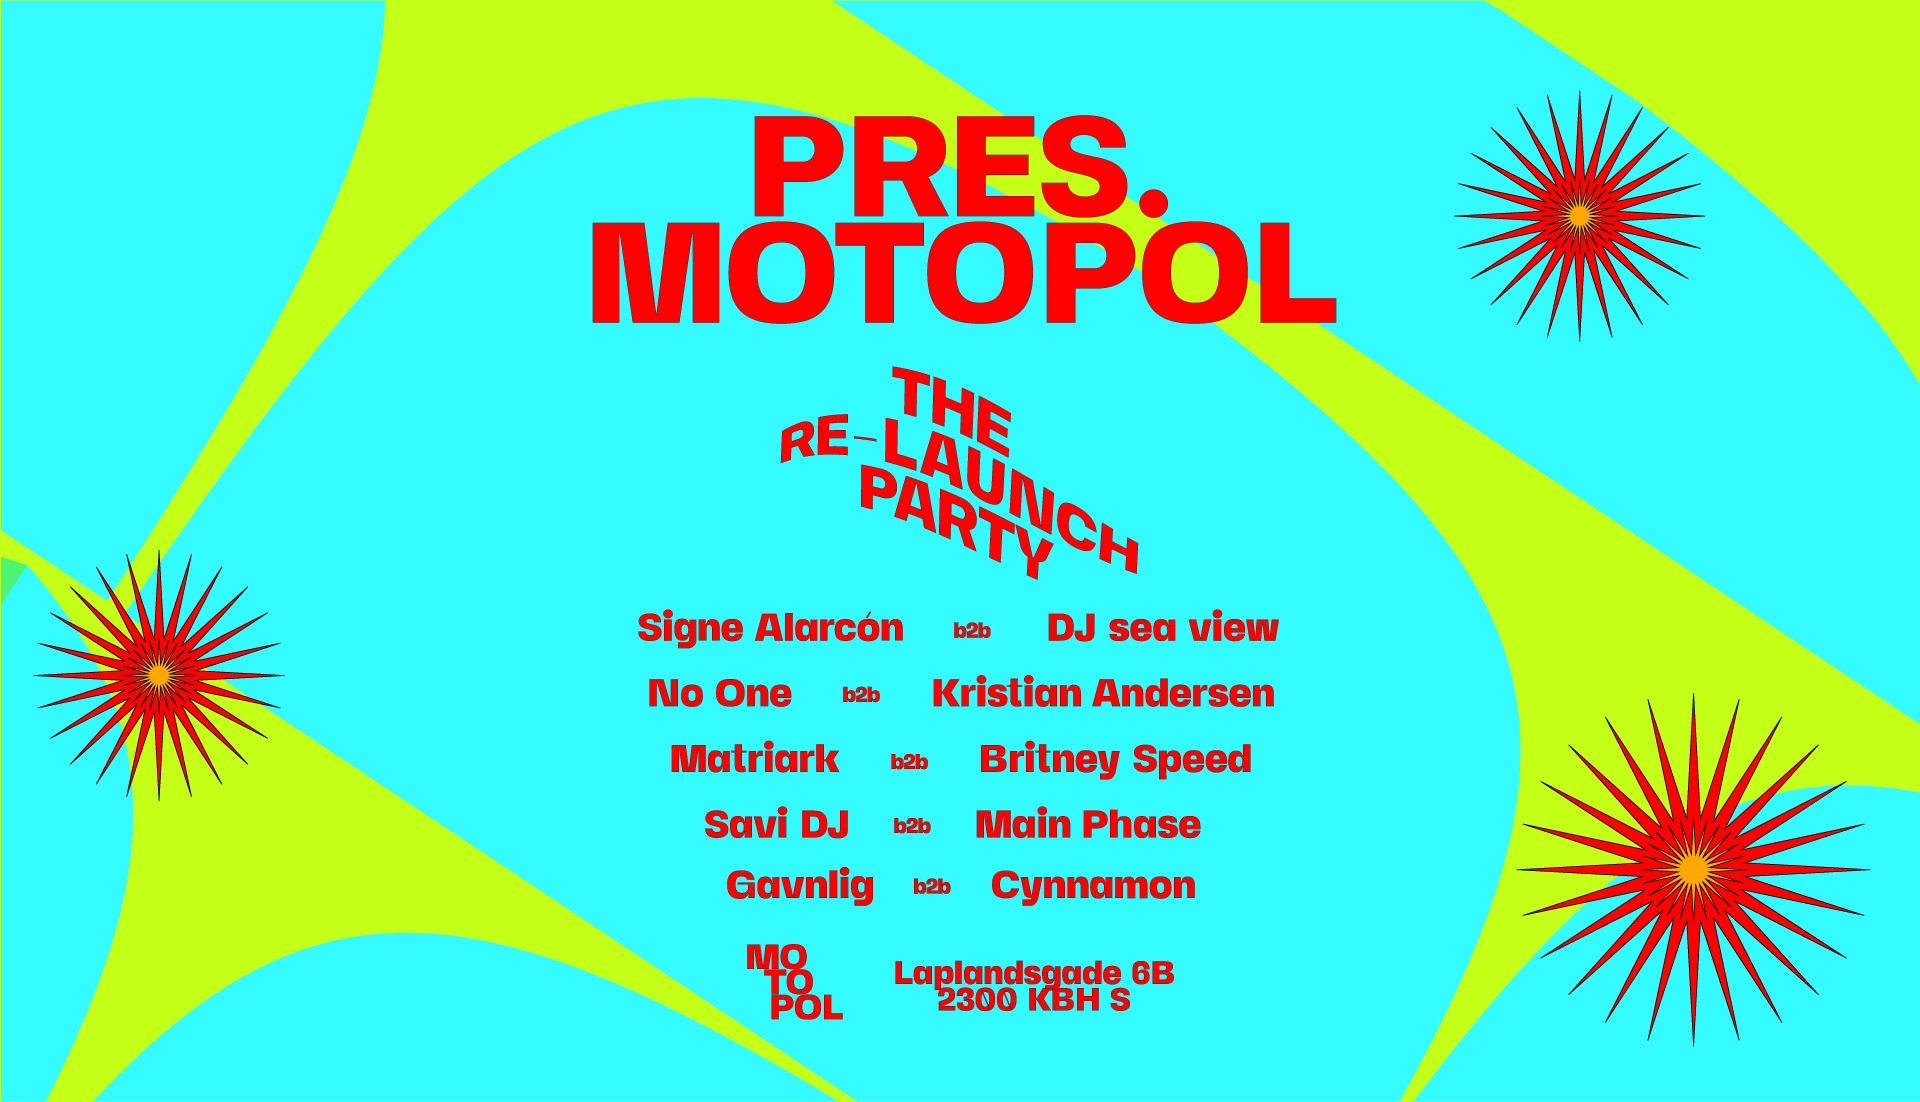 Motopol: THE RE-LAUNCH PARTY - フライヤー裏